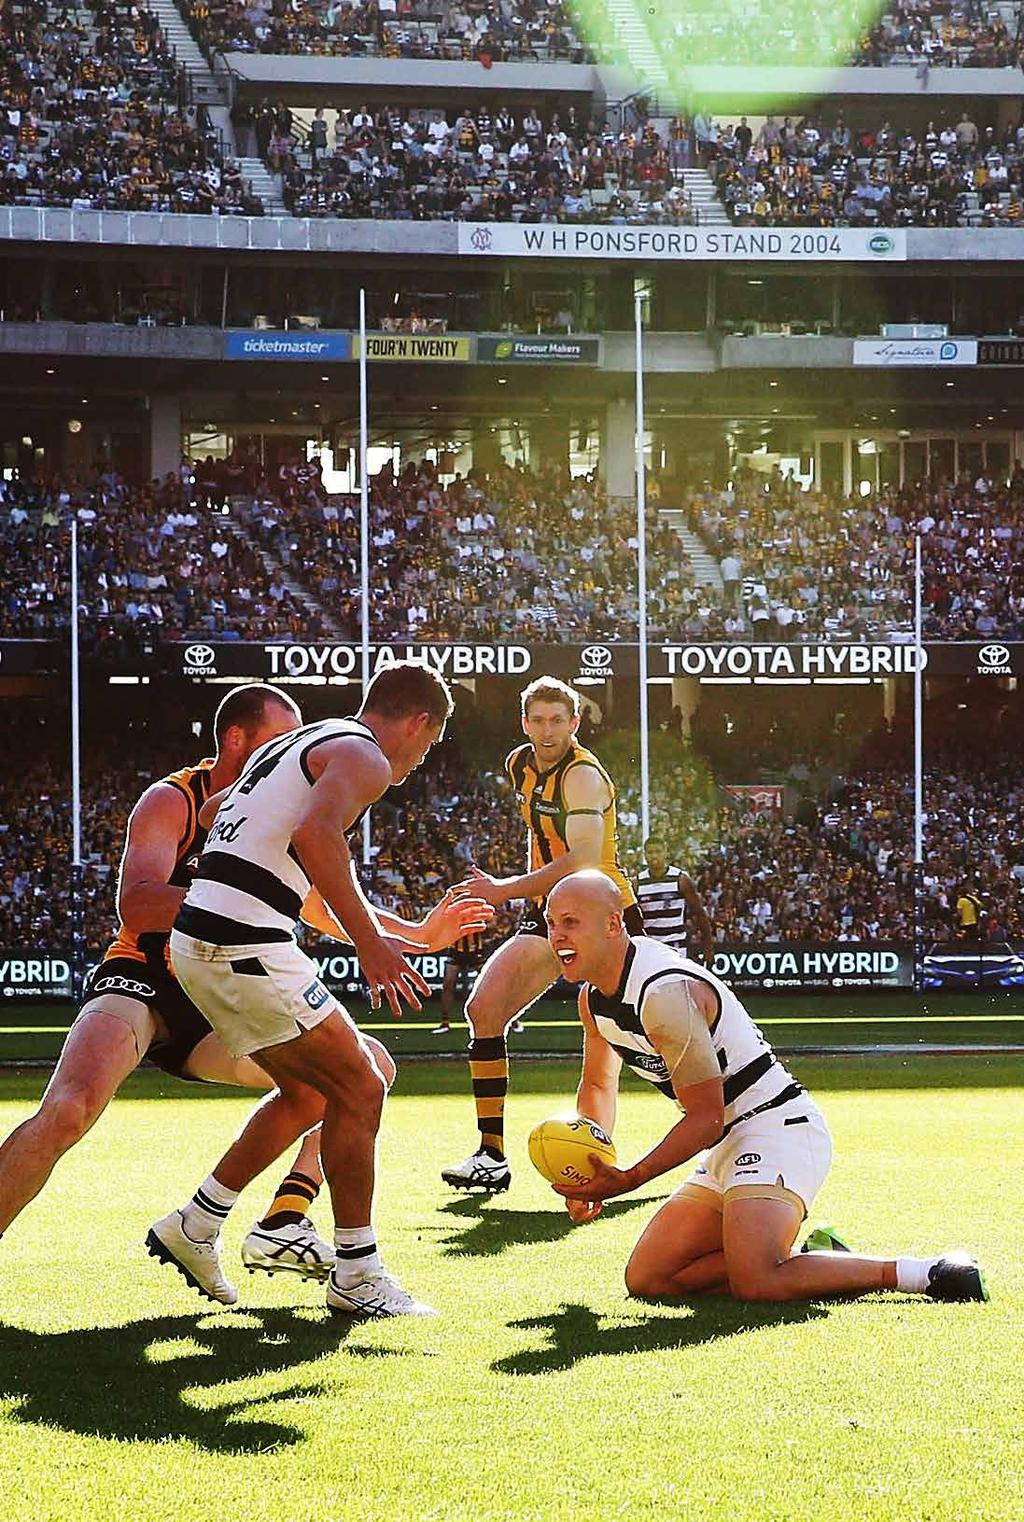 WE ARE GEELONG SUPPORTERS Be a part of an inclusive, passionate group of Melbourne-based professionals and supporters and cheer the cats to victory together in 2019 Your MCs Billy Brownless and Barry